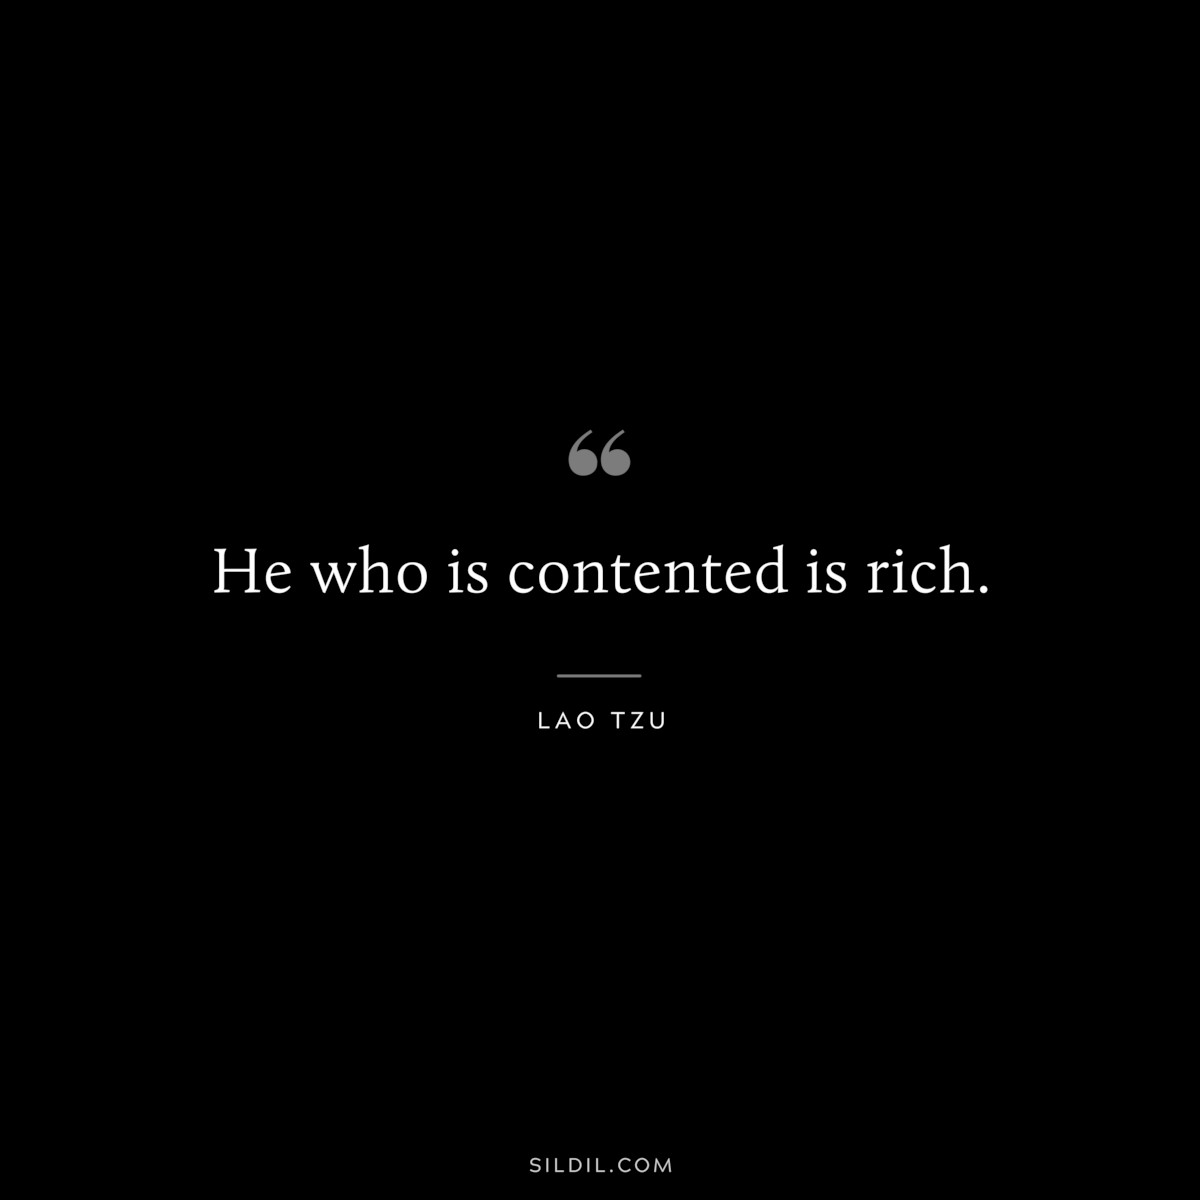 He who is contented is rich. ― Lao Tzu